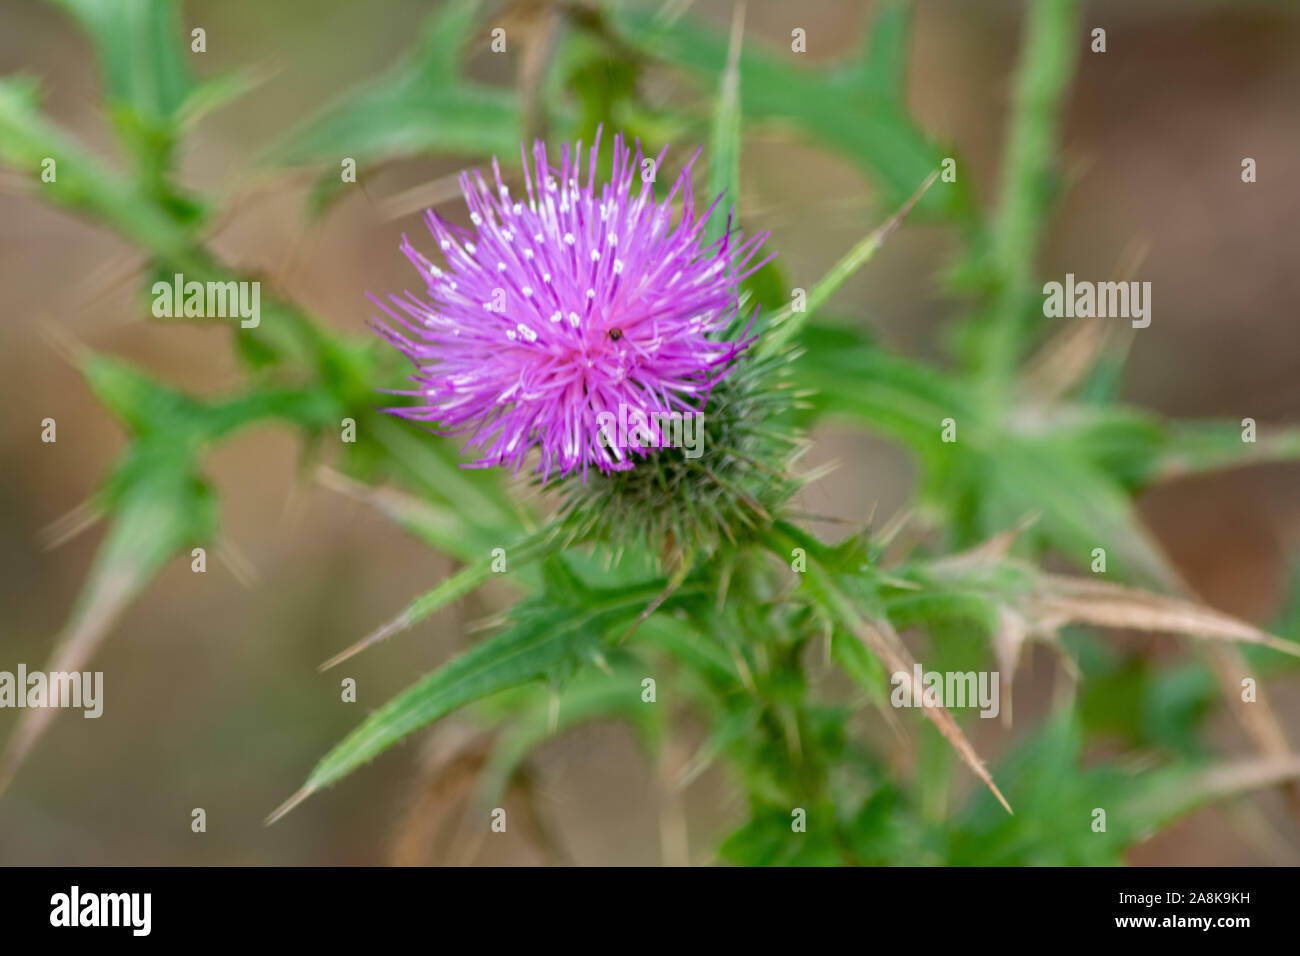 Pasture weed, Spear or Scotch Thistle flower, mauve pink floret with spiky pointy bracts, Australia Stock Photo